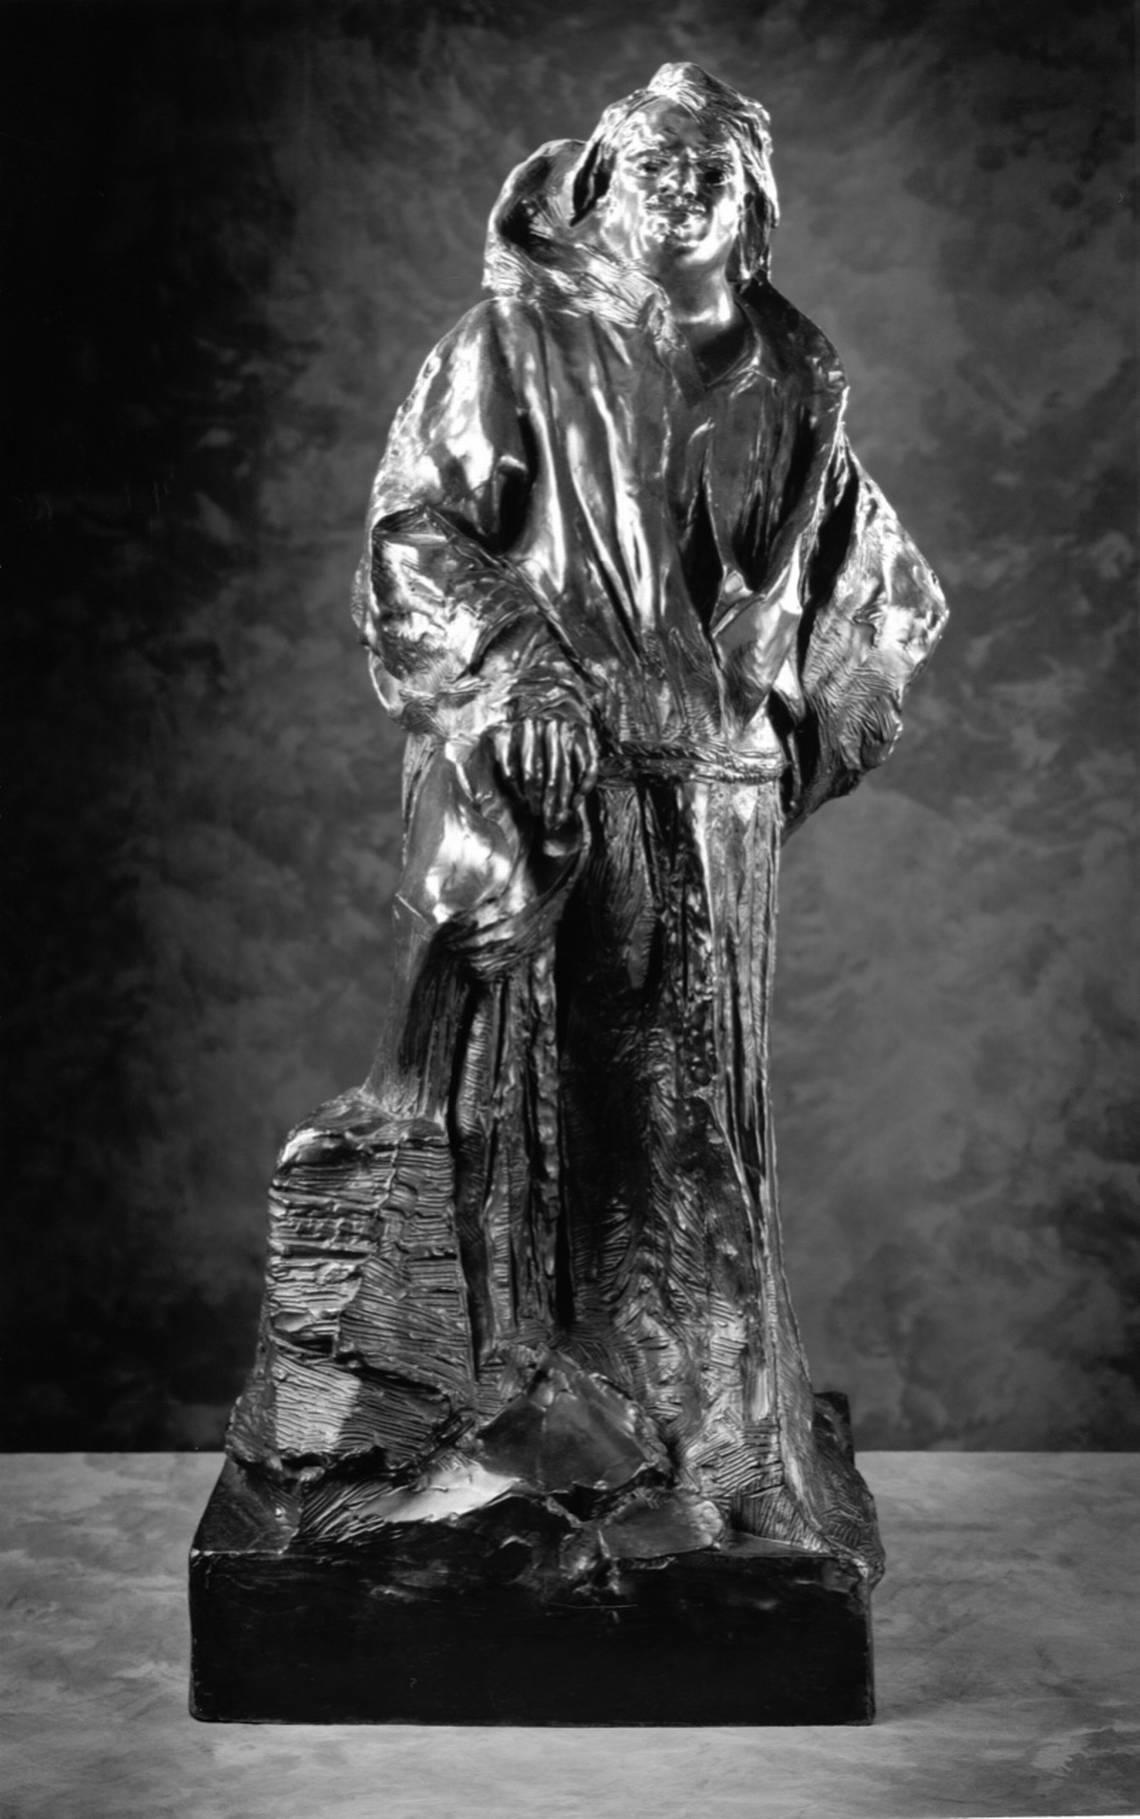 “Balzac” by French sculptor Auguste Rodin, will be on display at Brookgreen Gardens as part of the “Rodin: Contemplation and Dreams – Selections from the Iris and B. Gerald Cantor Collections” exhibition.